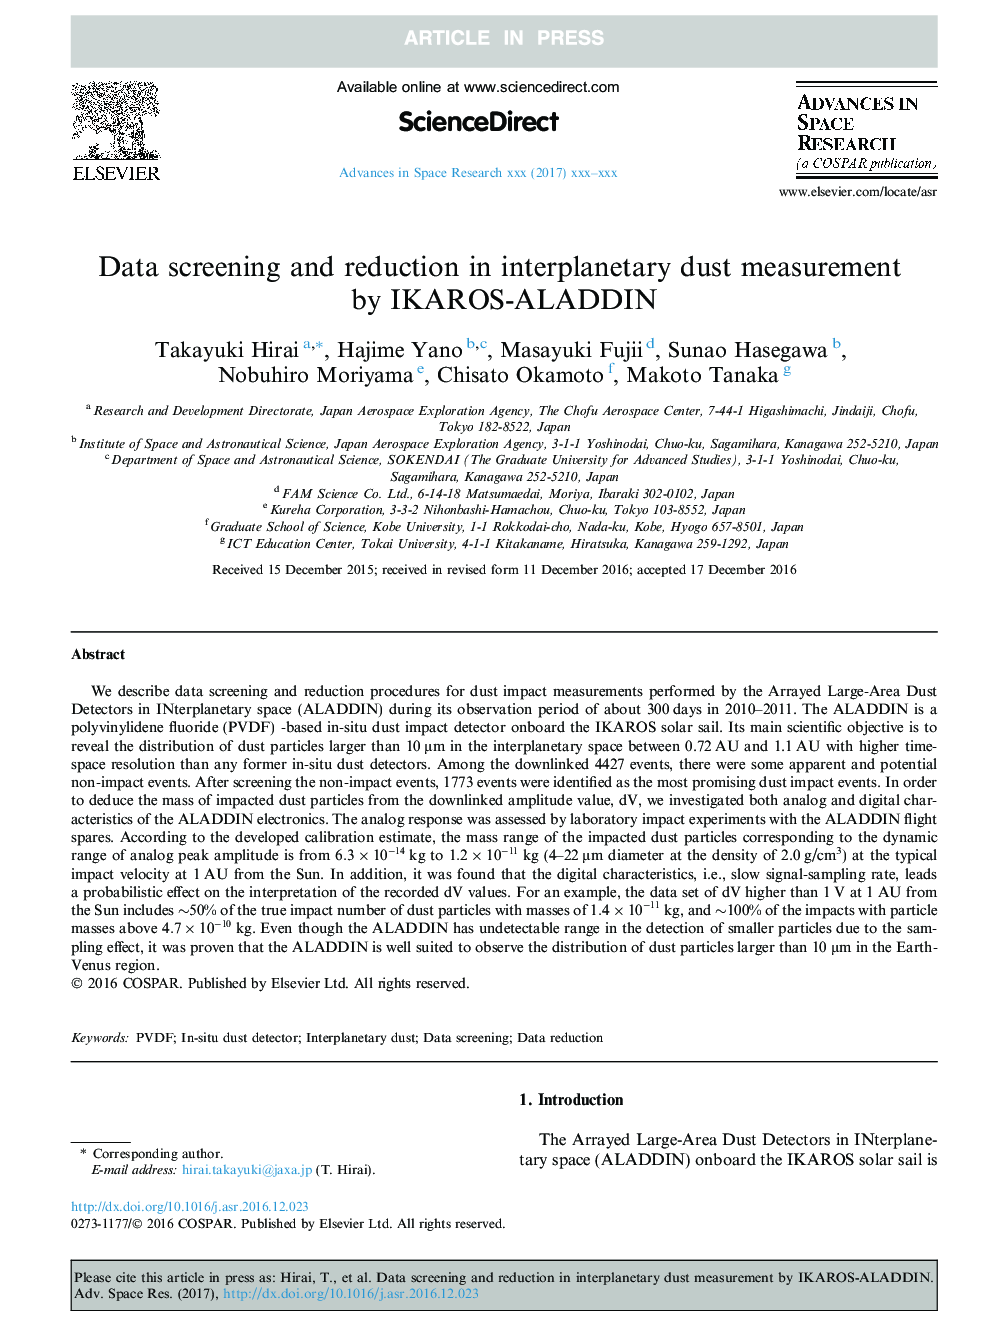 Data screening and reduction in interplanetary dust measurement by IKAROS-ALADDIN